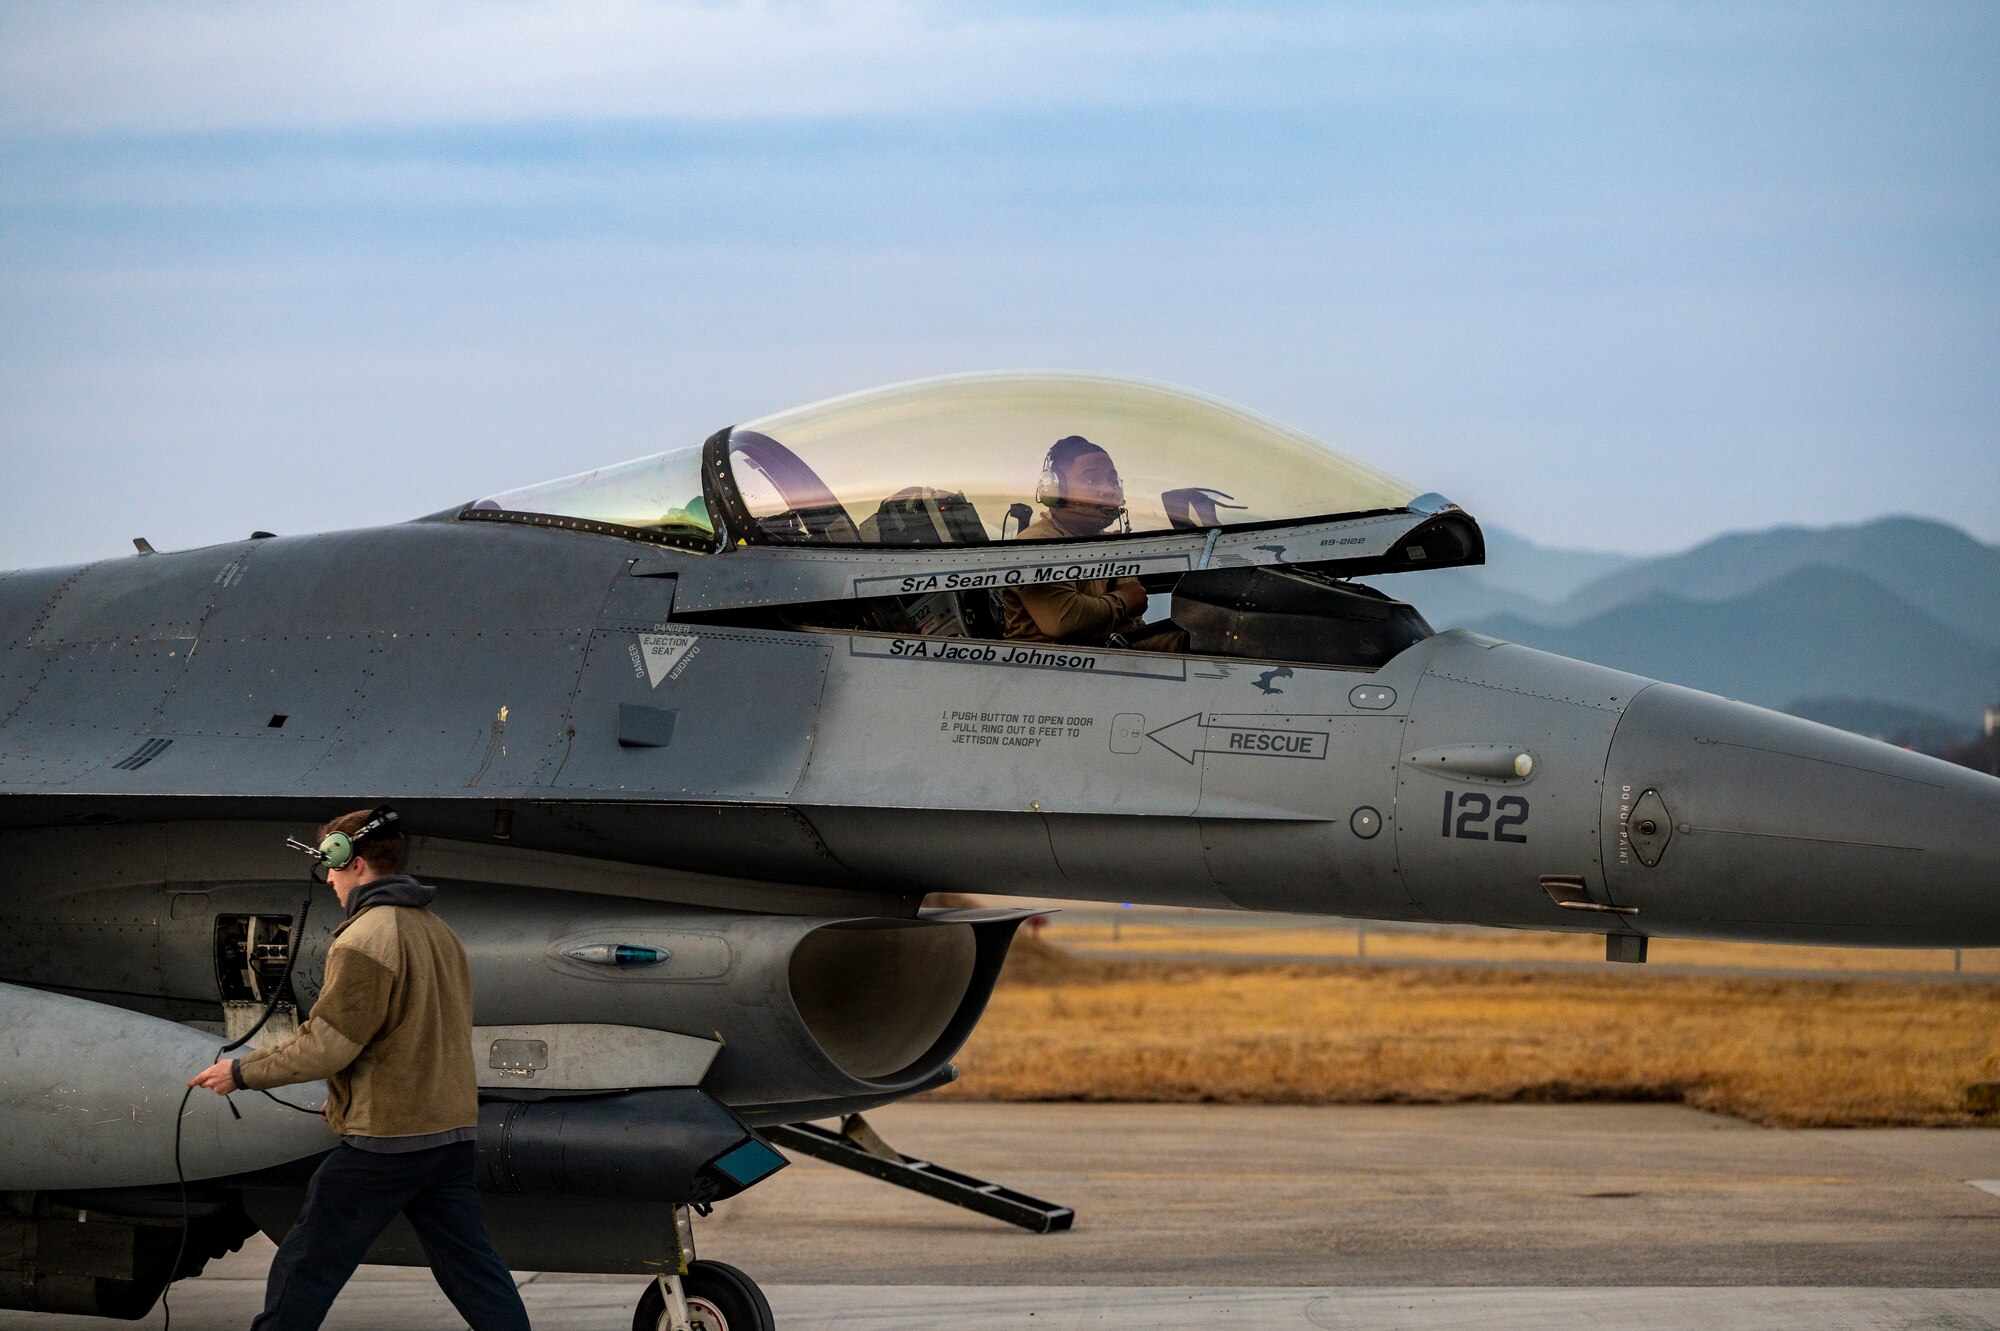 U.S. Air Force Staff Sgt. Joseph Weber, 36th Fighter Generation Squadron (FGS) aerospace propulsion craftsman and Staff Sgt. Stacy Spears, 36th FGS crew chief, perform post-flight maintenance on an F-16 Fighting Falcon during a training event at Daegu Air Base, Republic of Korea, Feb. 2, 2023.